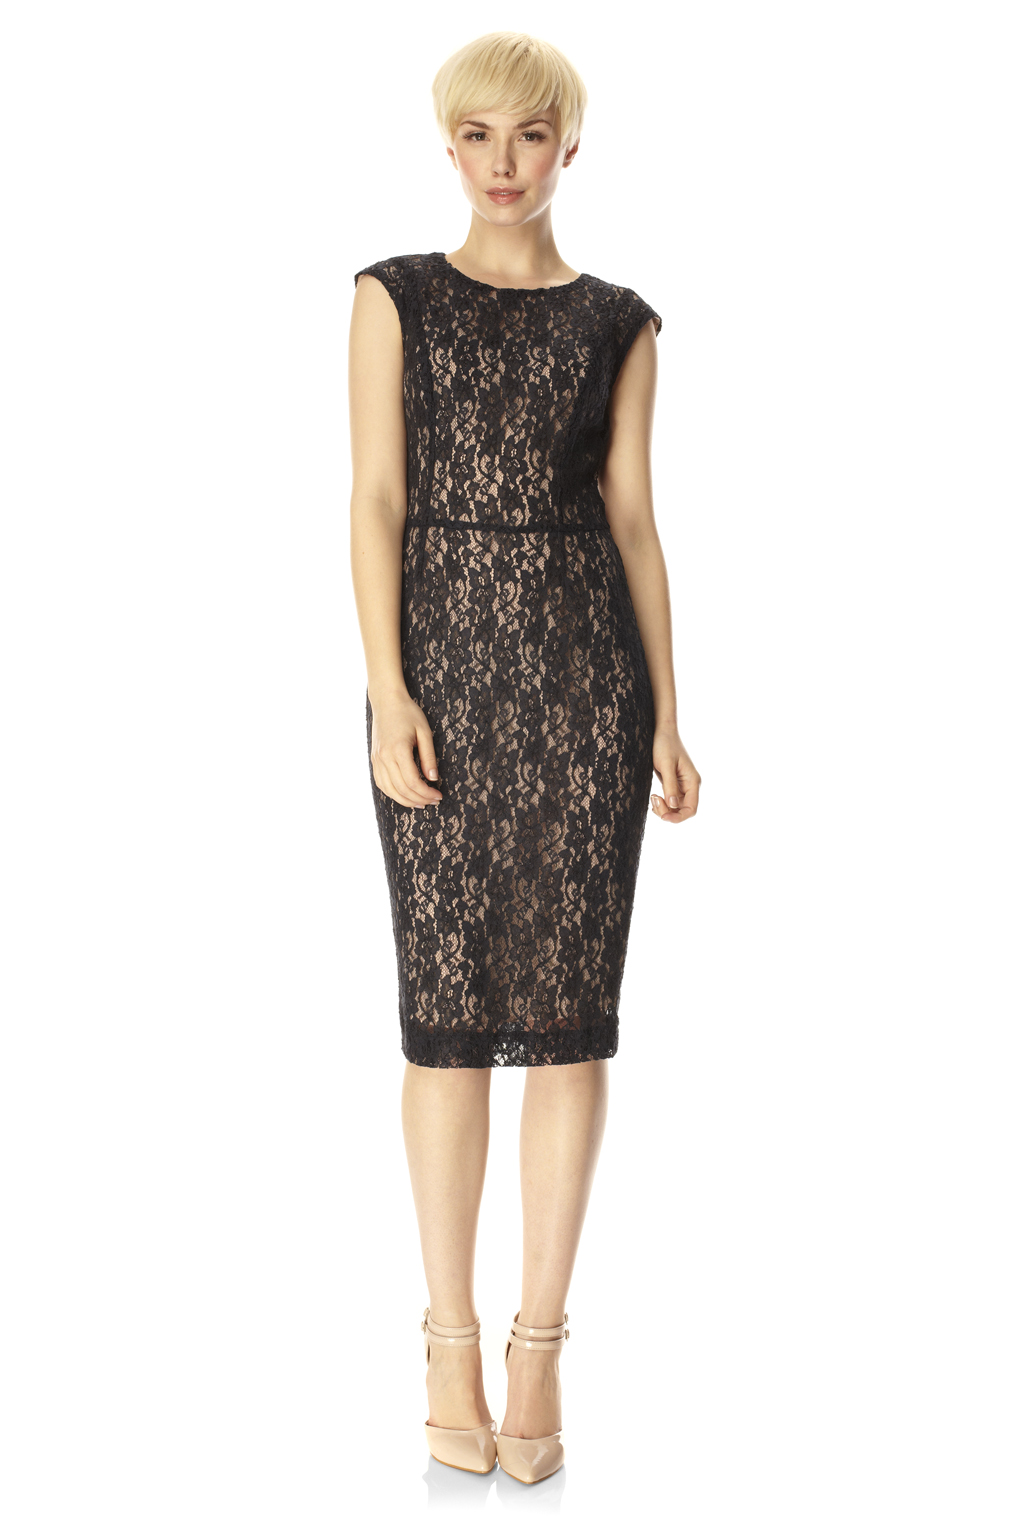 Lyst - French connection Angela Lace Dress in Black